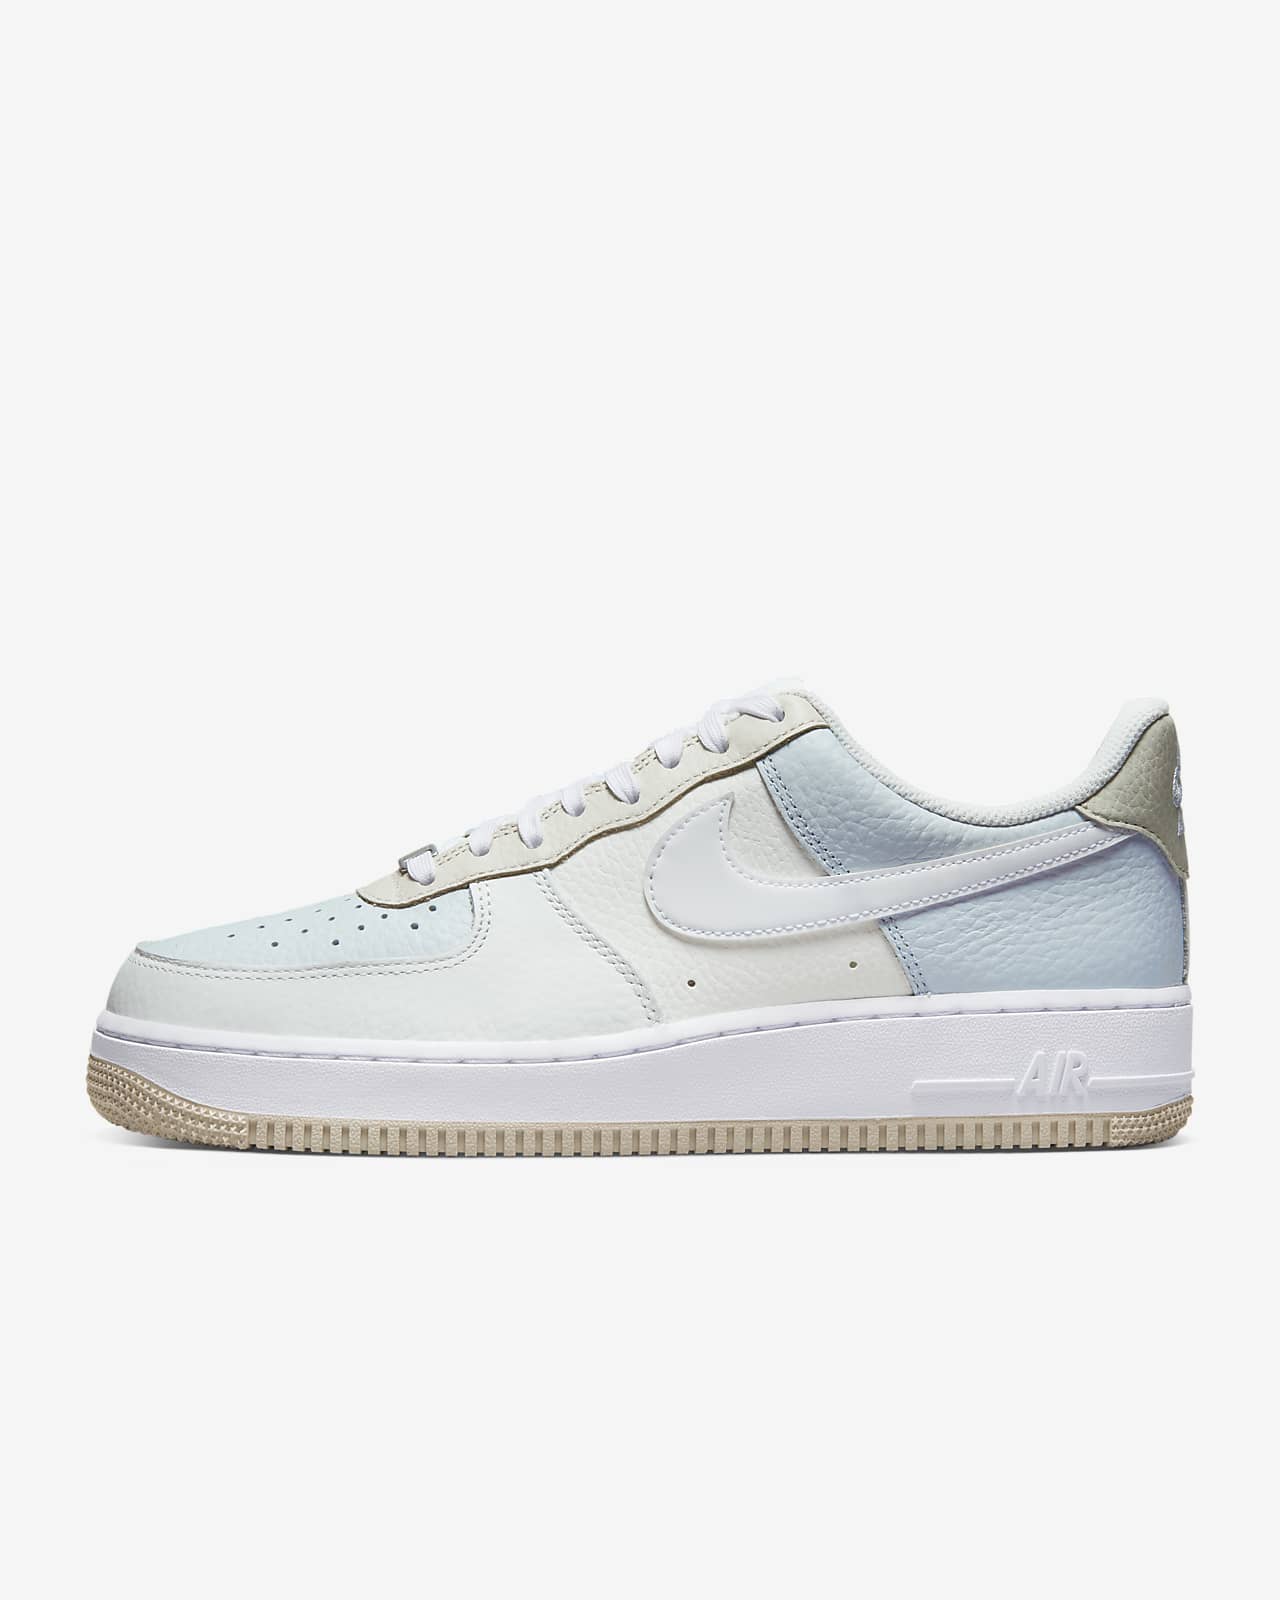 Chaussure Nike Air Force 1 '07 SN pour Homme